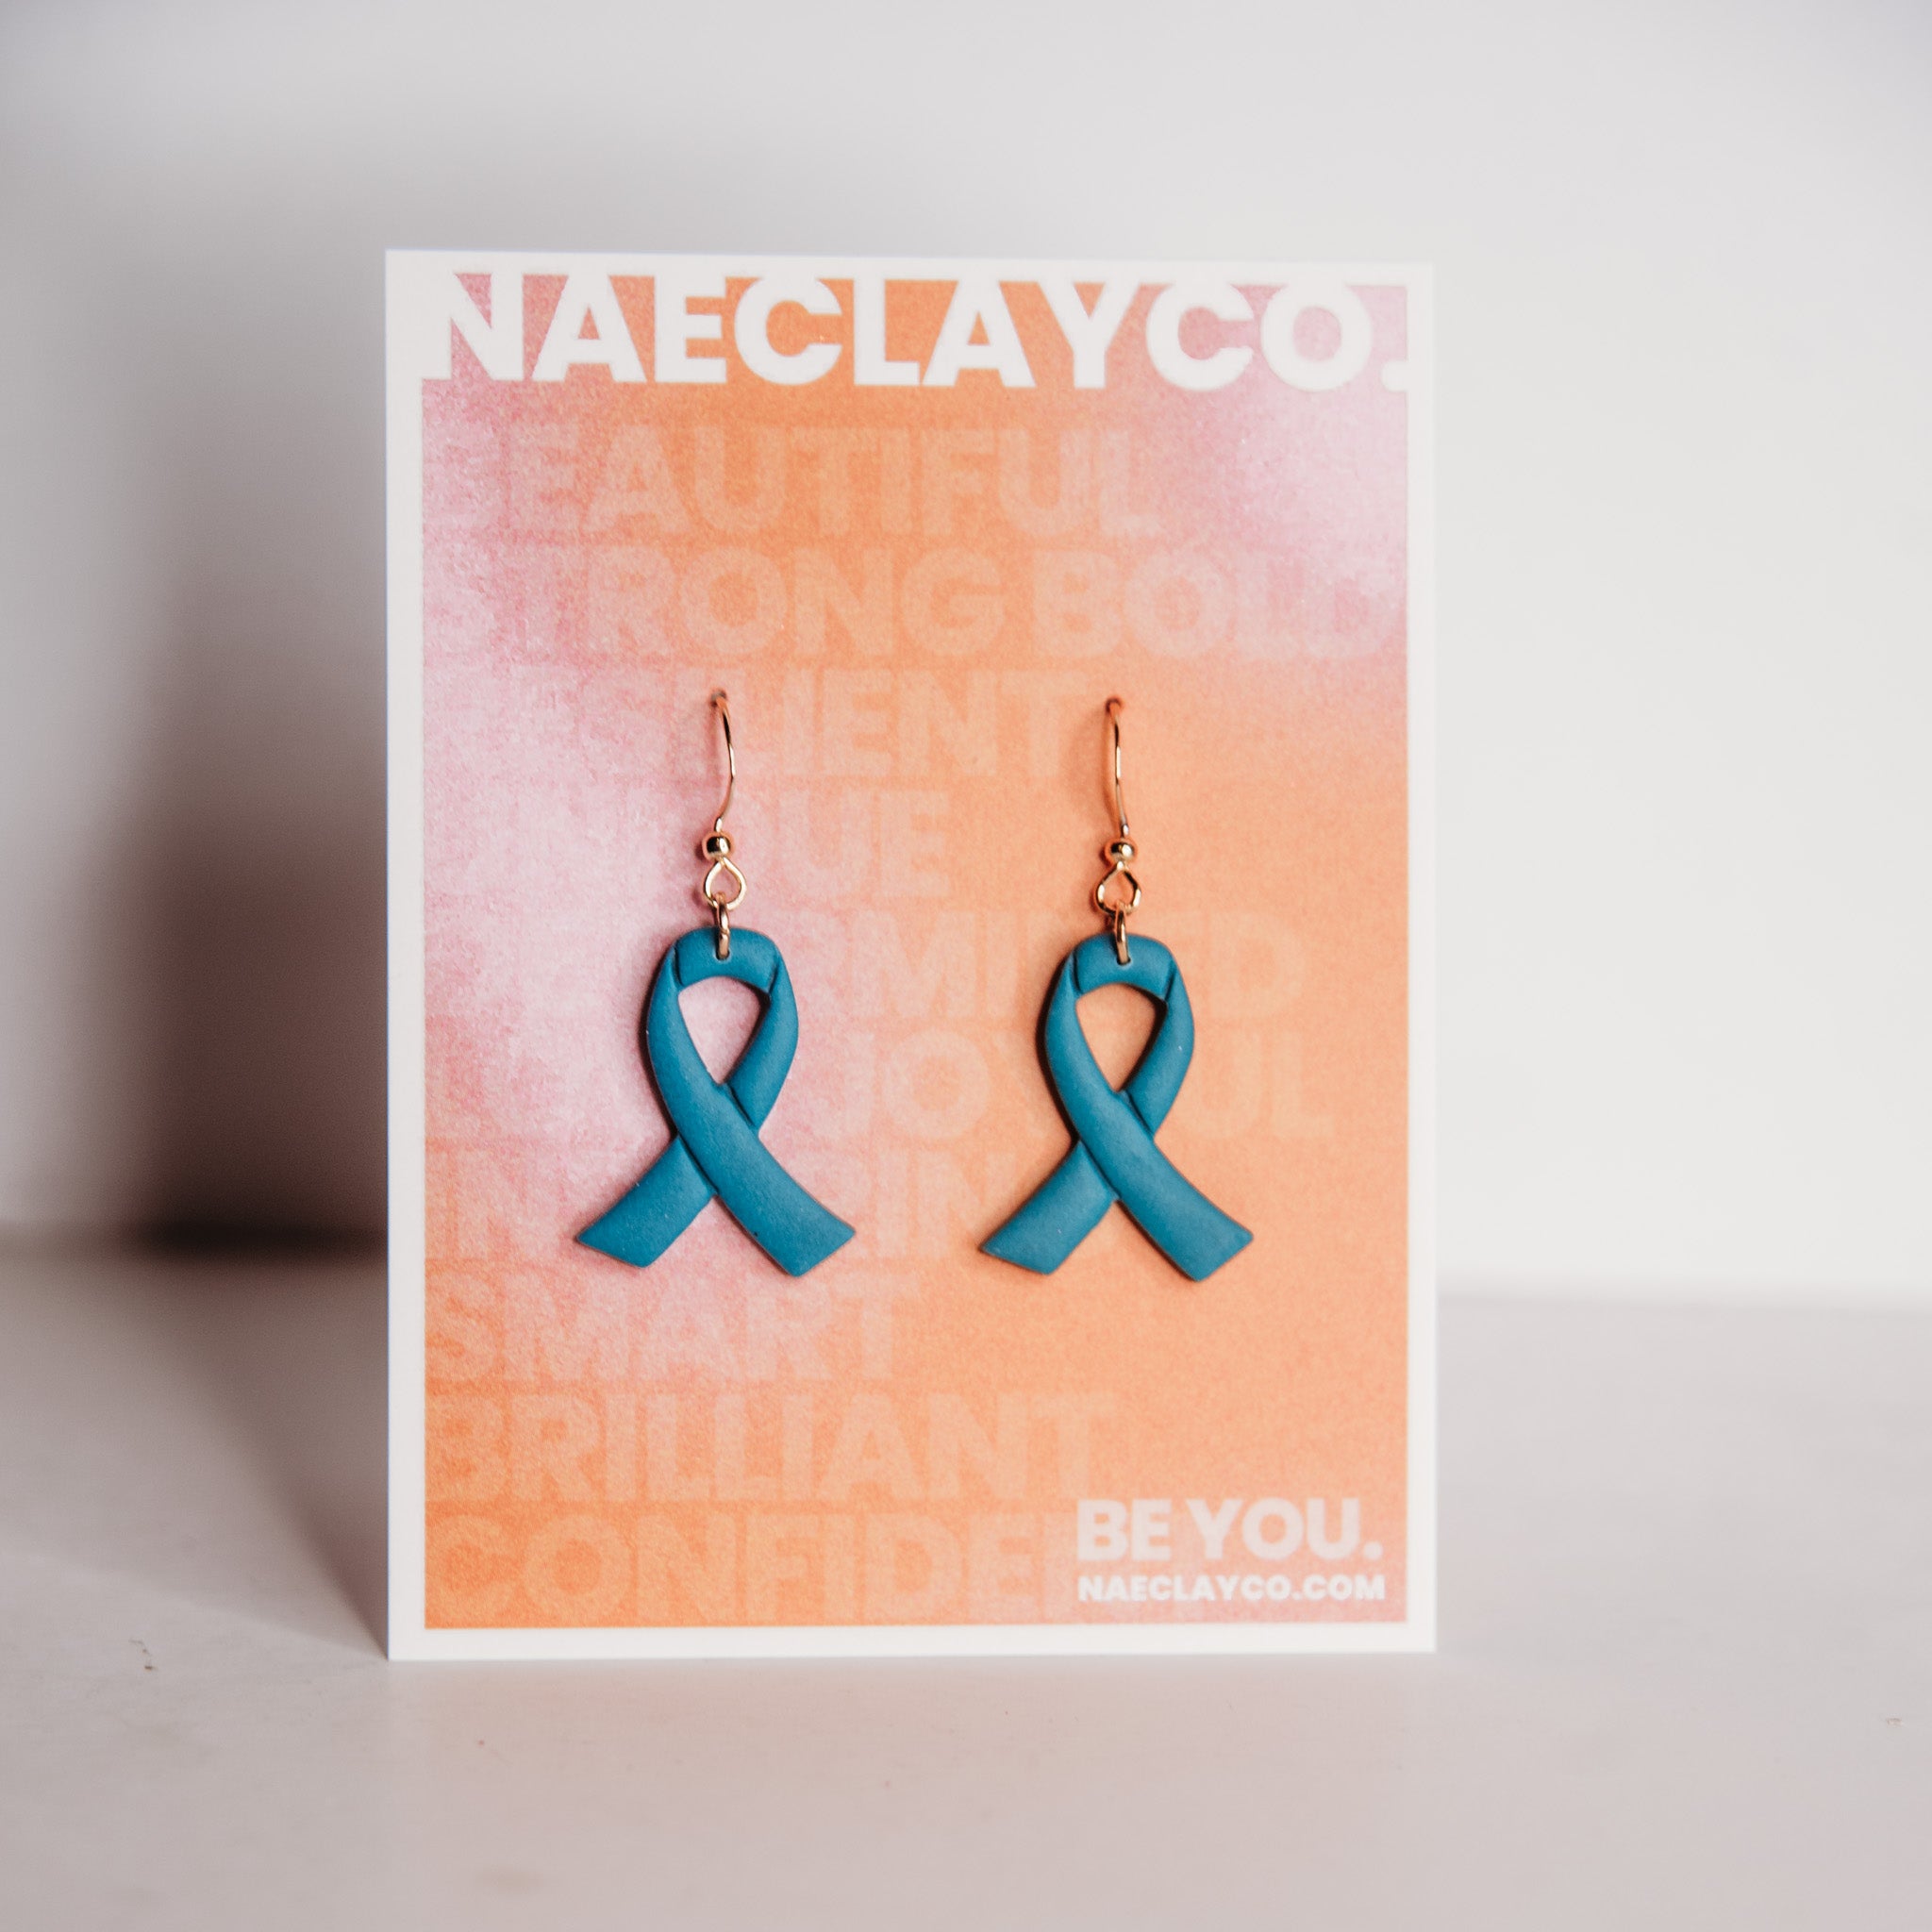 Cancer Awareness Earring Collection